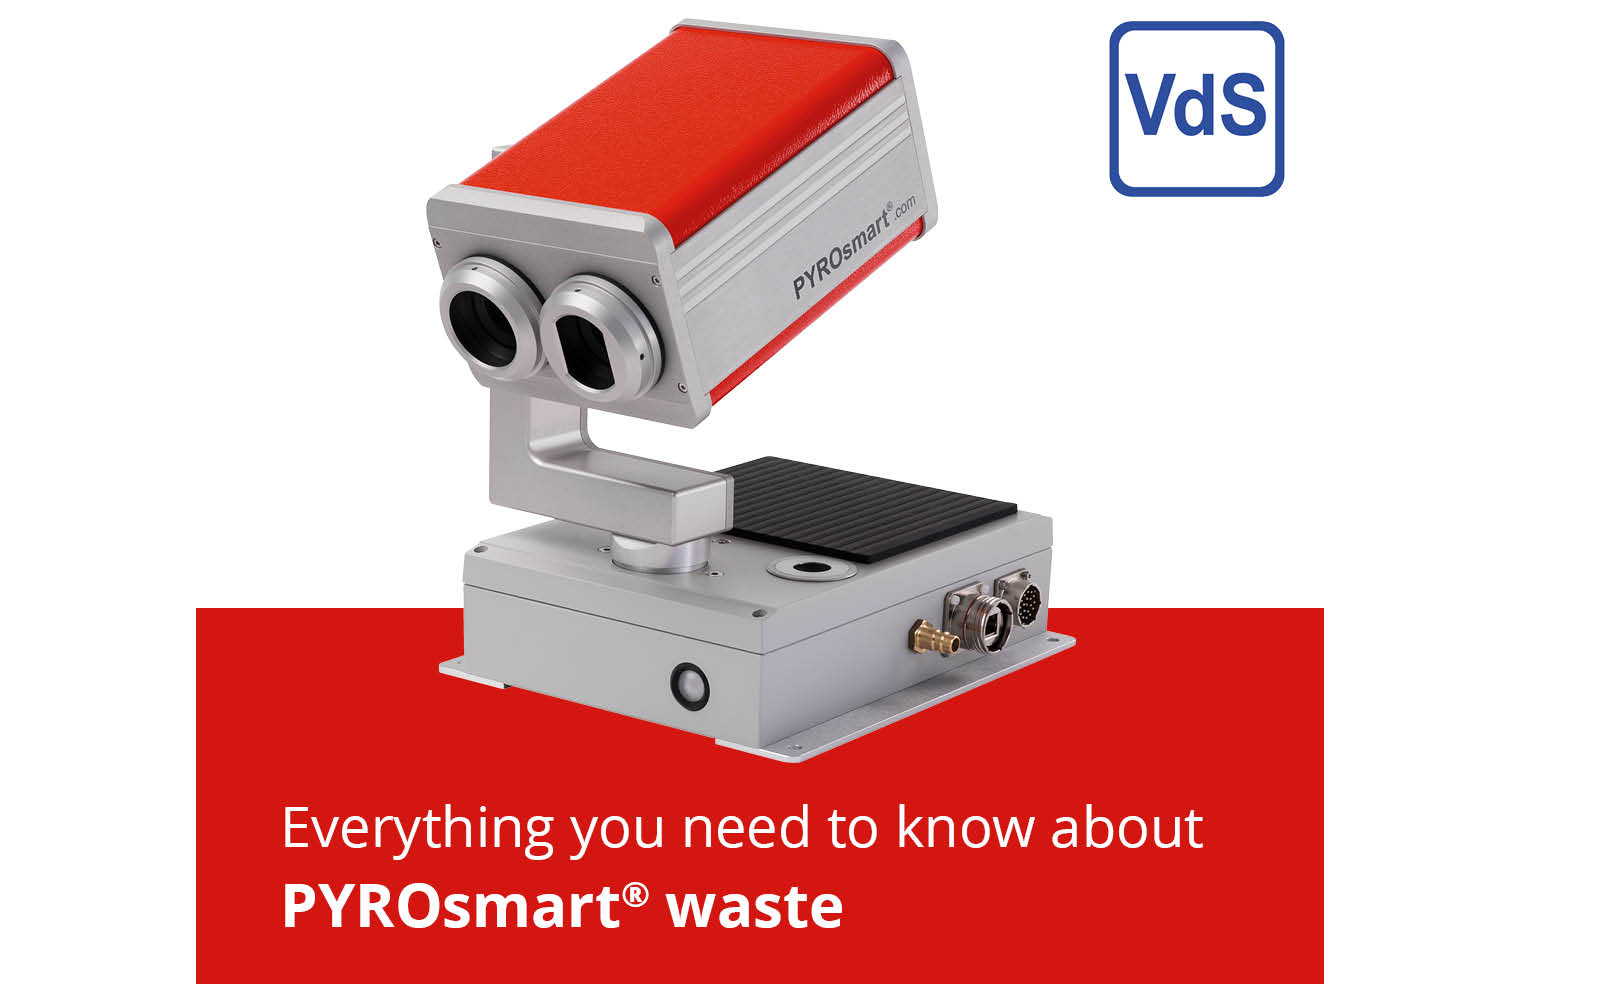 PYROsmart® waste: Waste bunker monitoring with infrared cameras and extinguishing systems